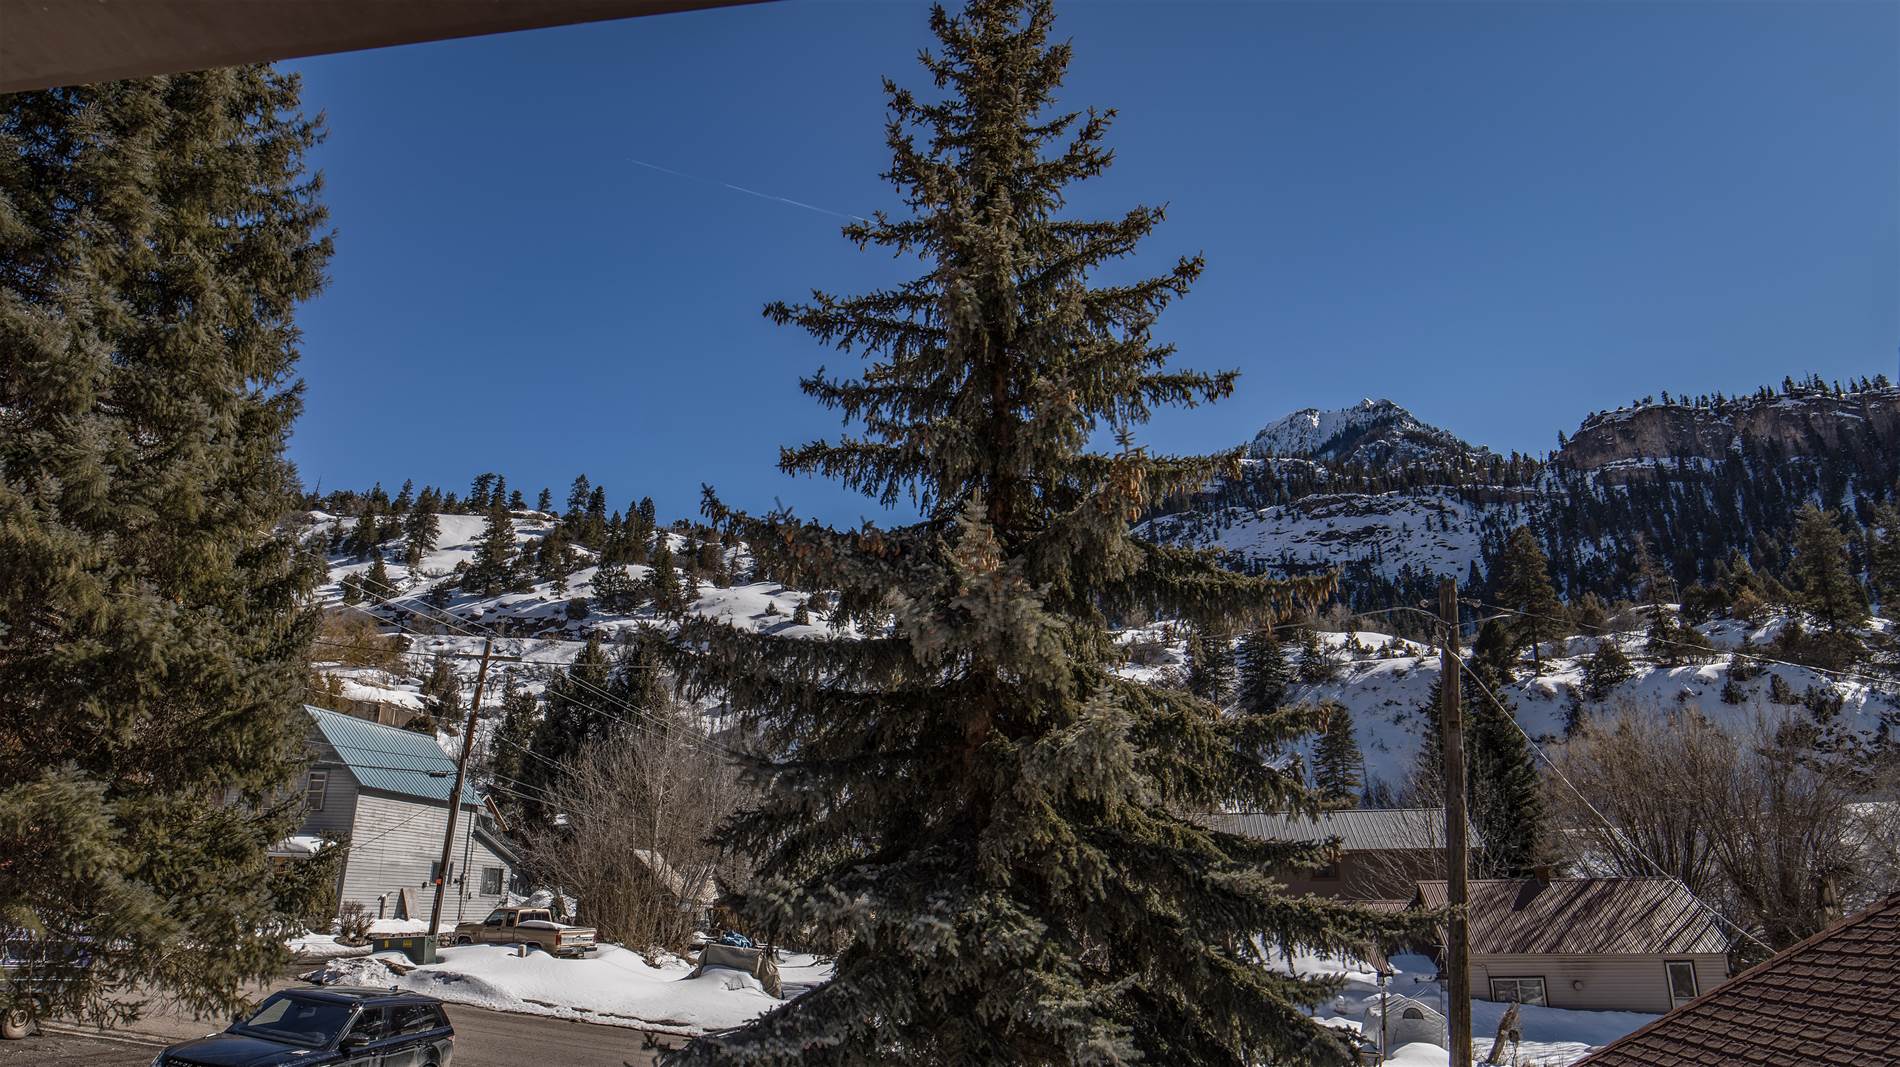 302 1/2 2nd Street, Ouray, CO 81427